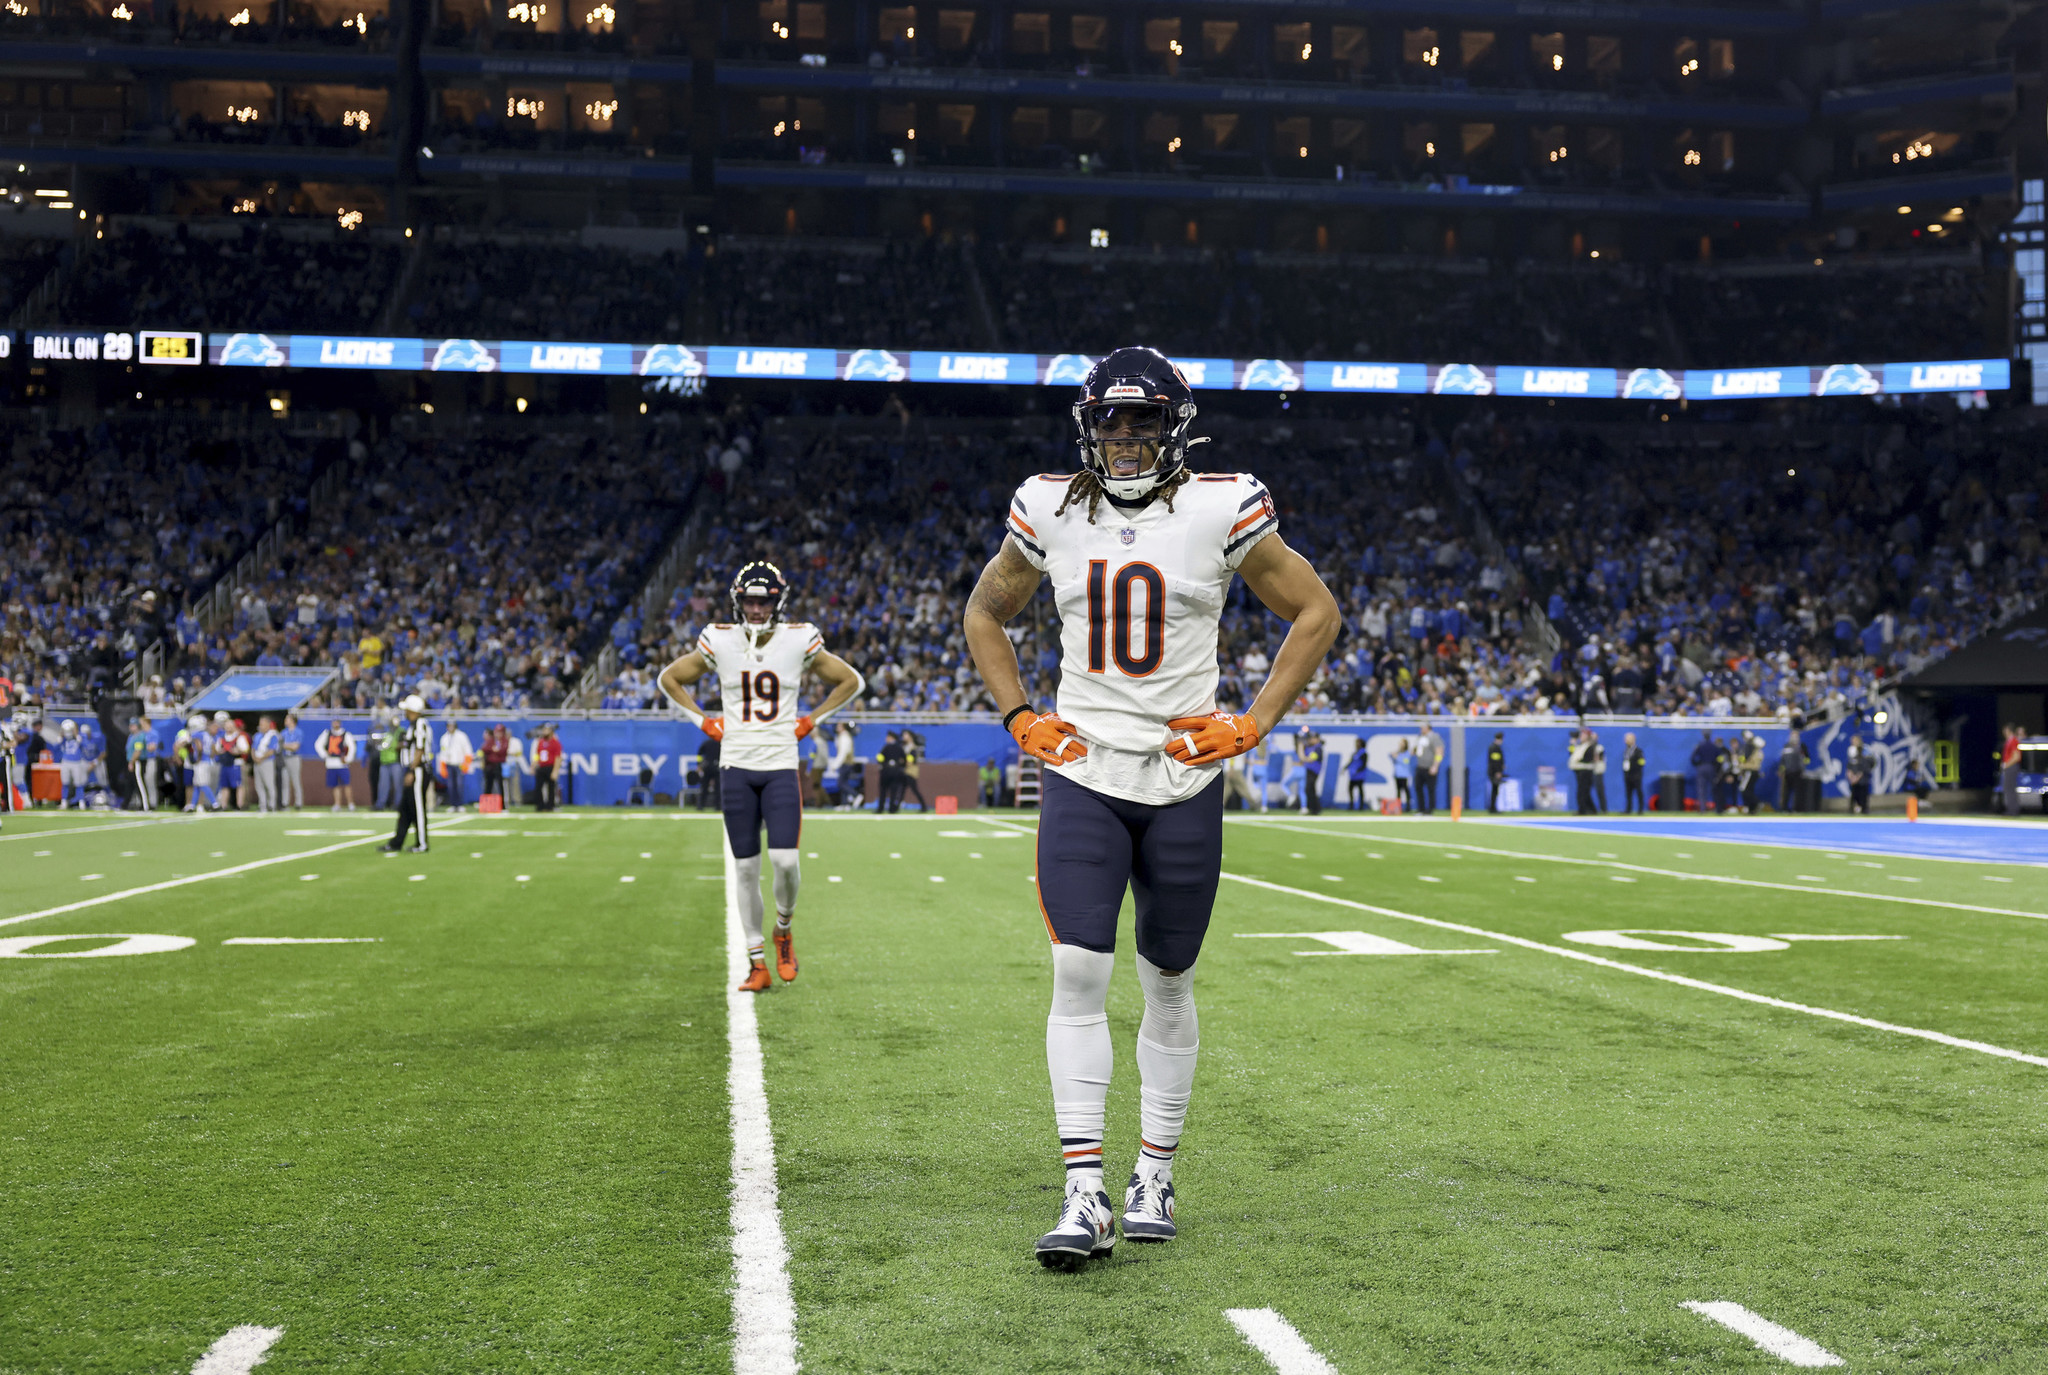 NFL Week 2: Bears, Texans are favorites among underdog bets